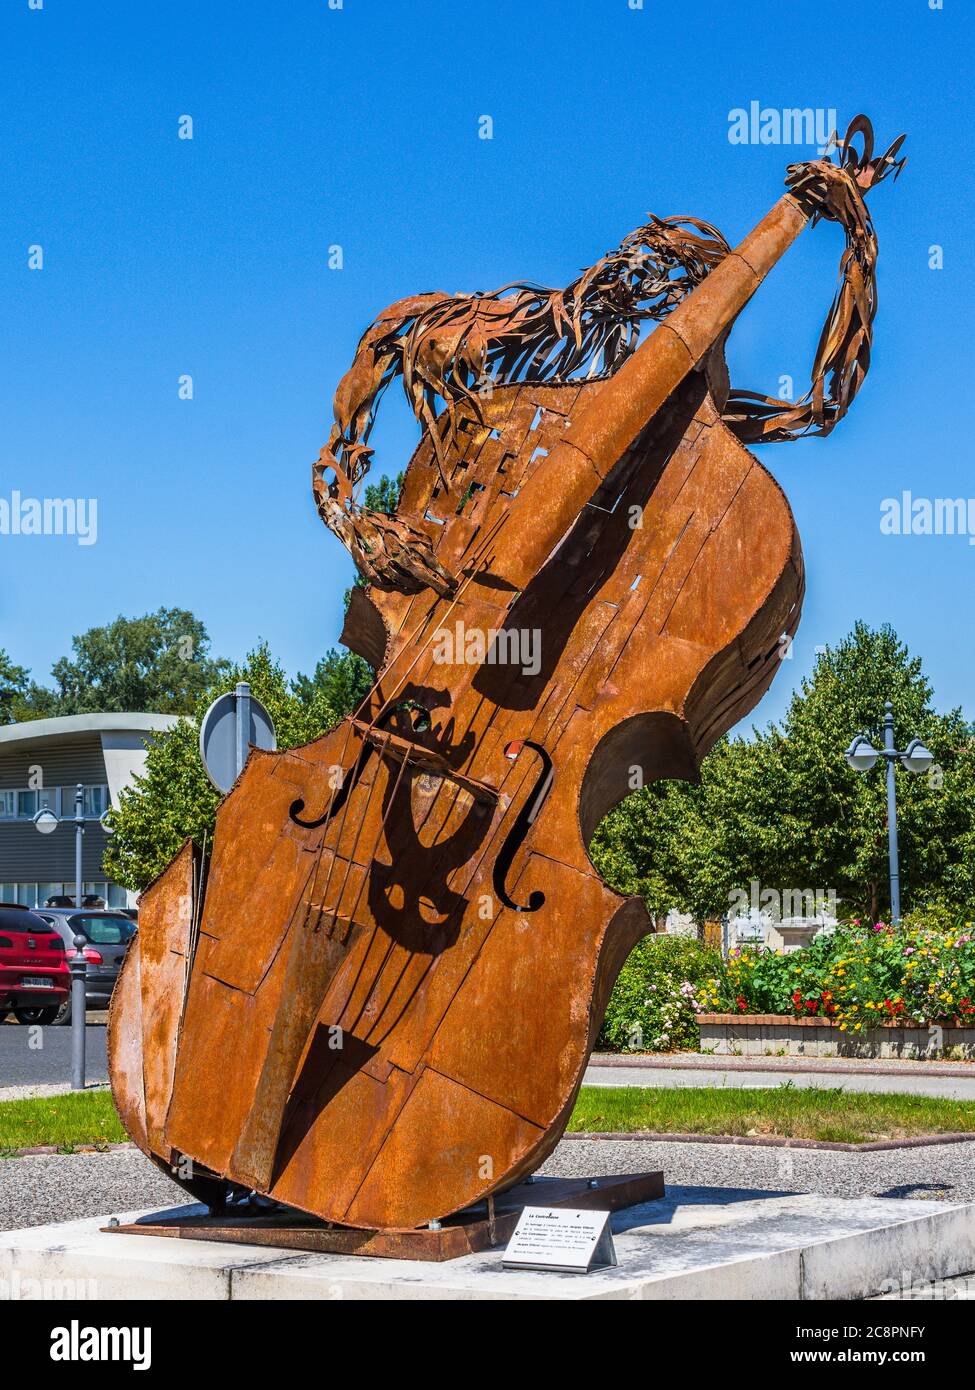 Rusty double bass sculpture "La Contrebasse" made by by Patrick Suskind in  1991 in centre of Perrusson, Indre-et-Loire, France Stock Photo - Alamy